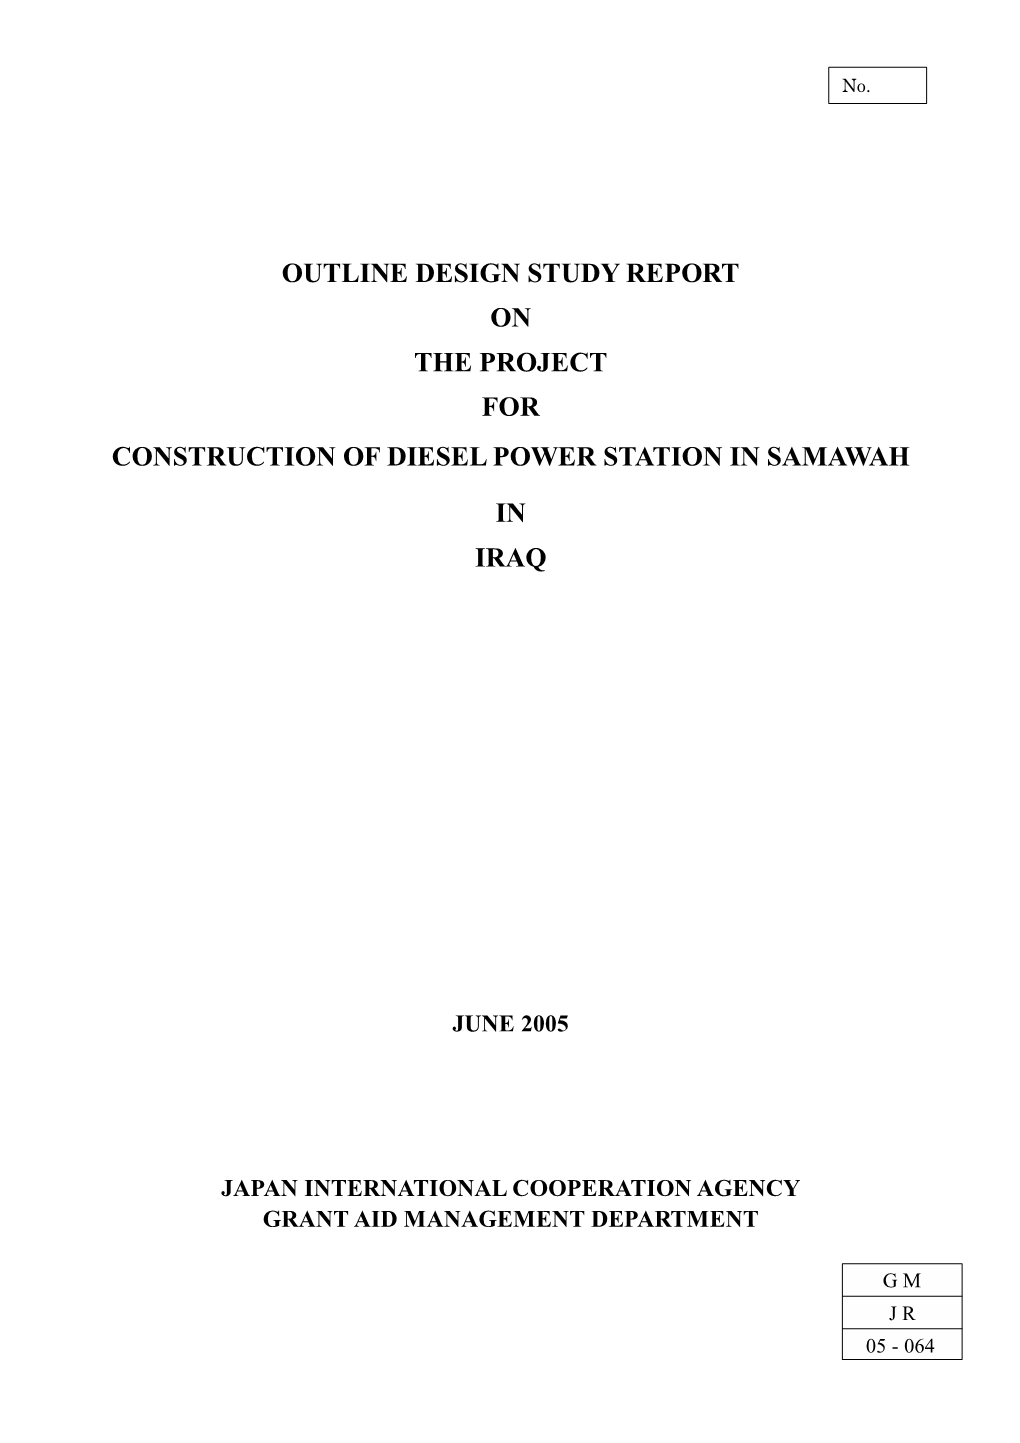 Outline Design Study Report on the Project for Construction of Diesel Power Station in Samawah in Iraq